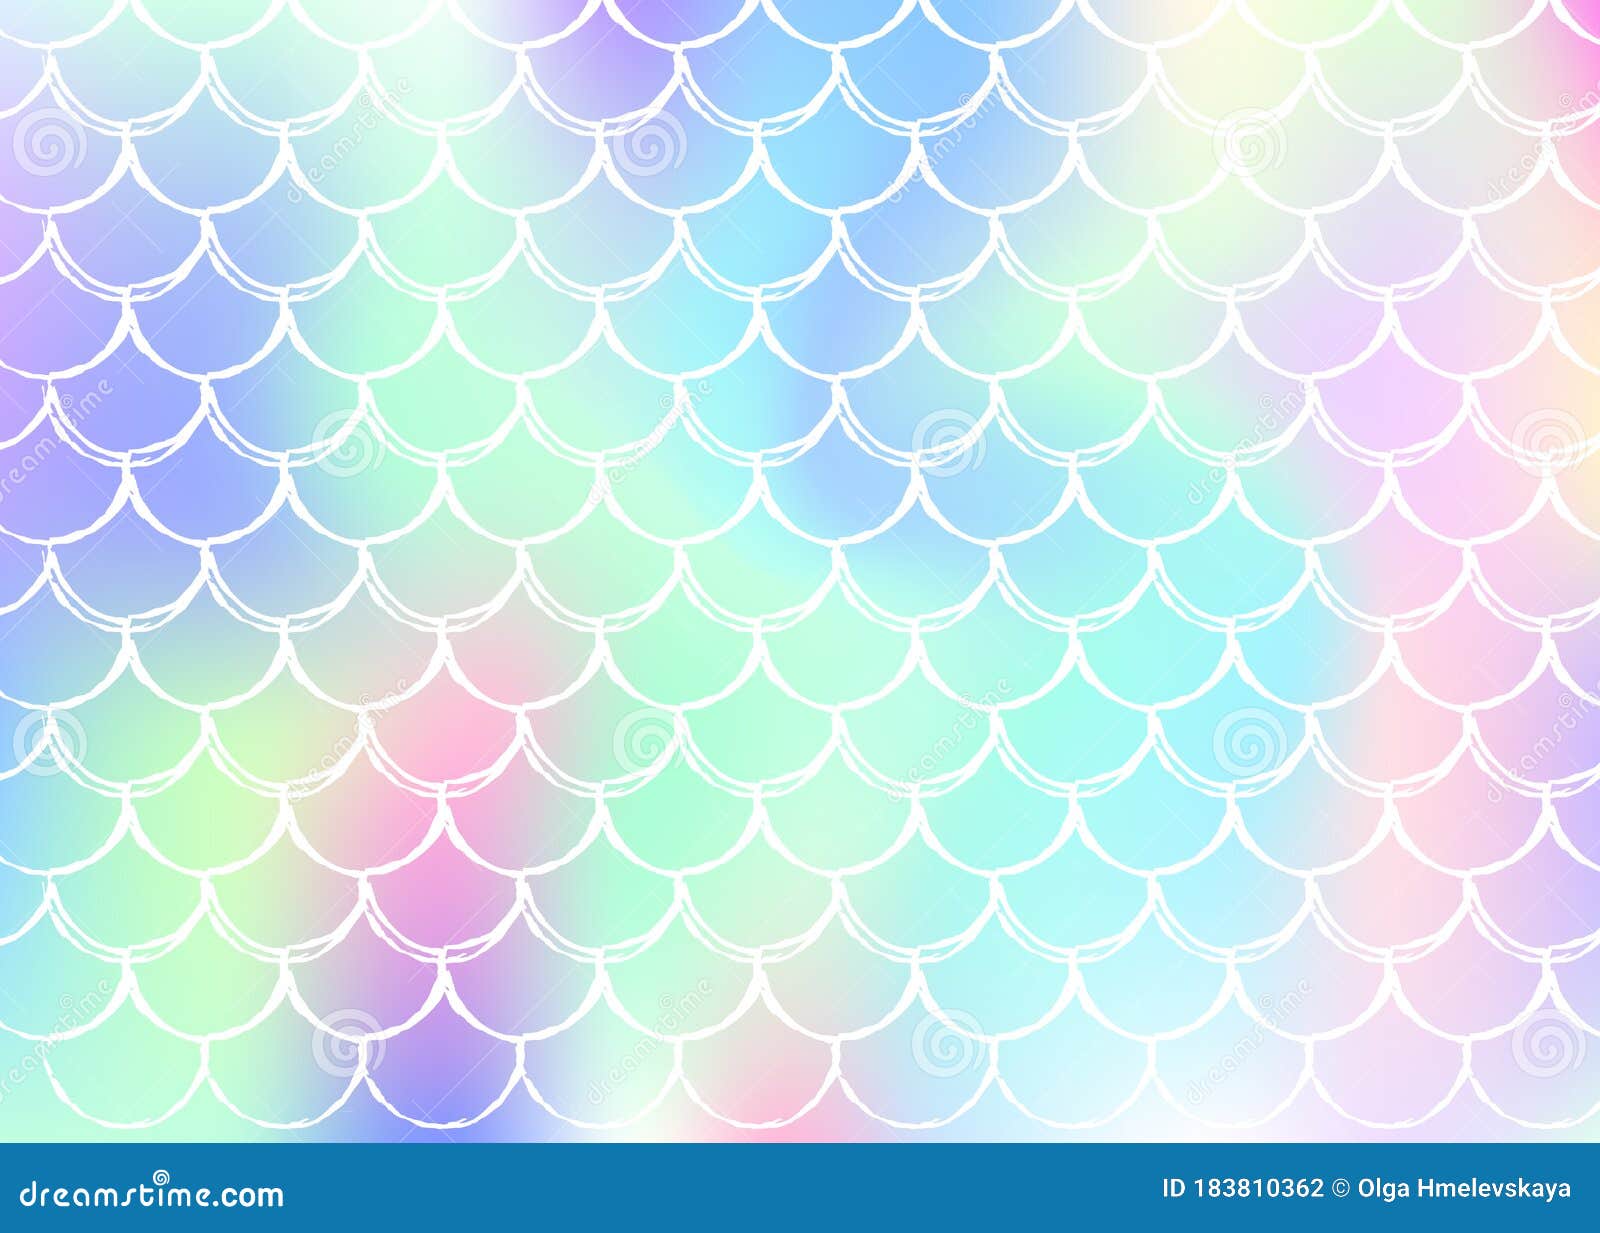 Gradient Scale Background With Holographic Mermaid. Stock Illustration ...